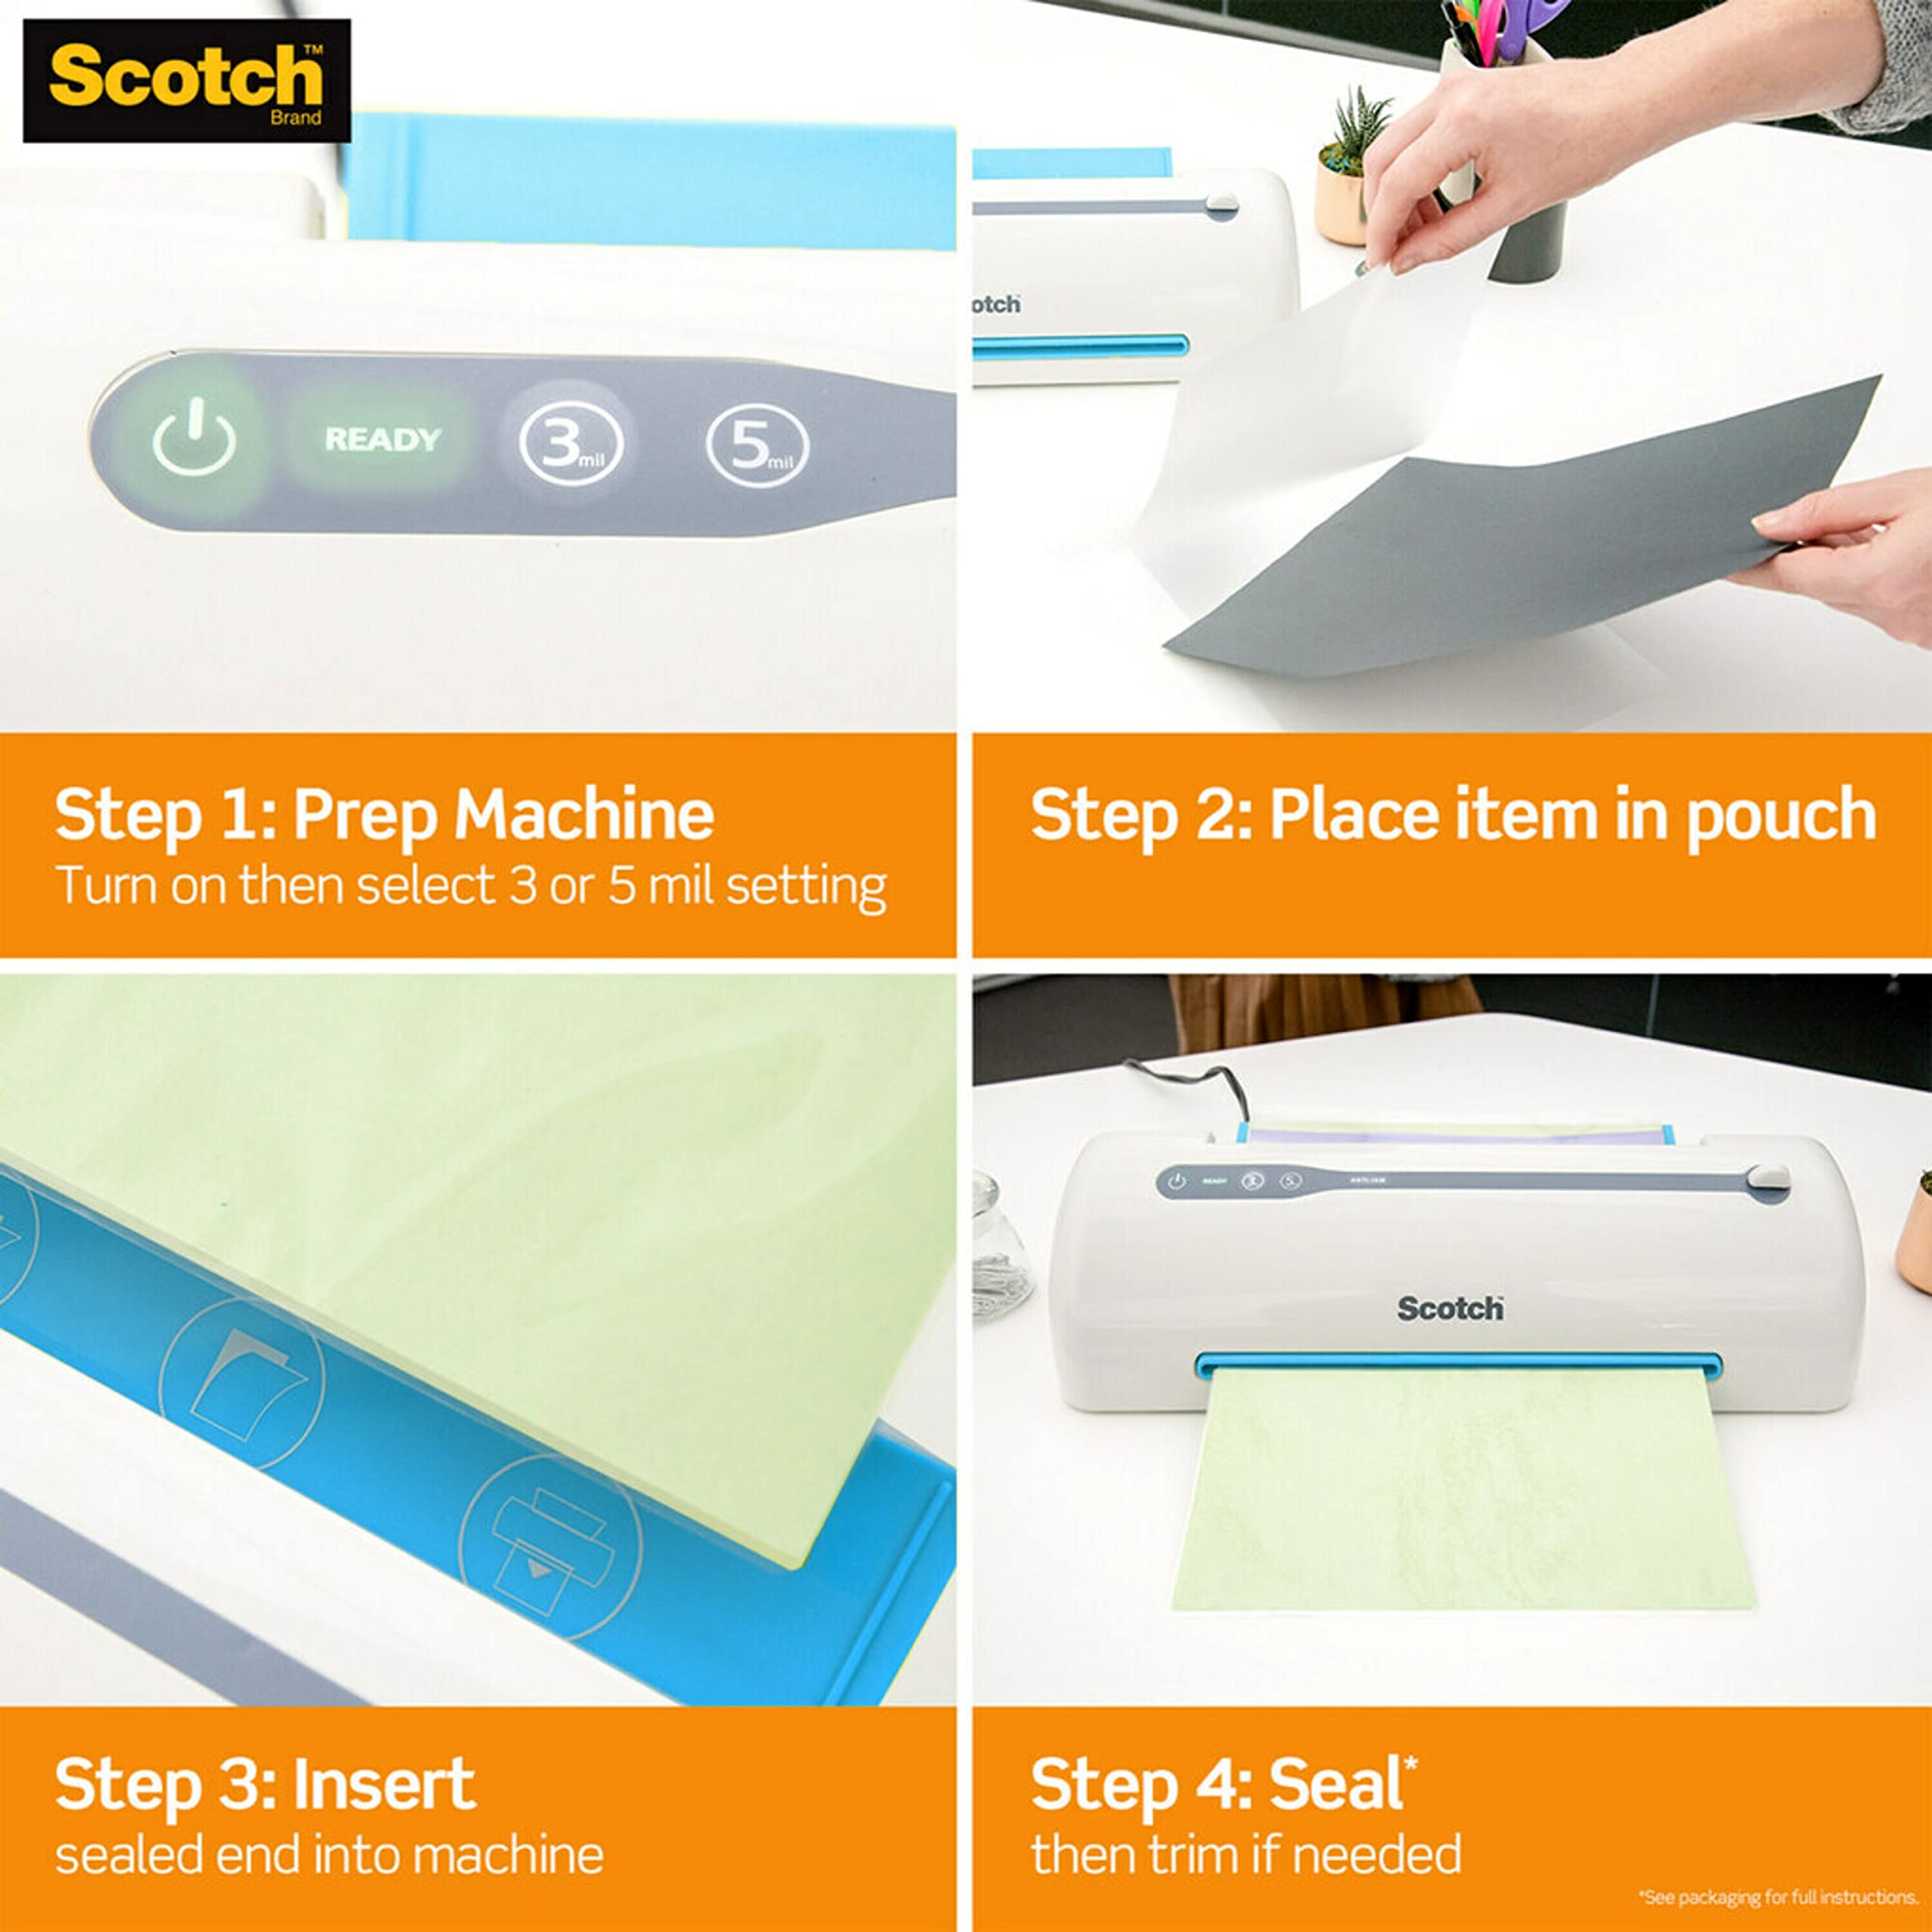 Scotch Thermal Laminating Pouches, 25 Pack Laminating Sheets, 3 Mil, 11 x 17 Inches, Education Supplies & Craft Supplies, For Use With Thermal Laminators, Legal Size Sheets (TP3856-25)